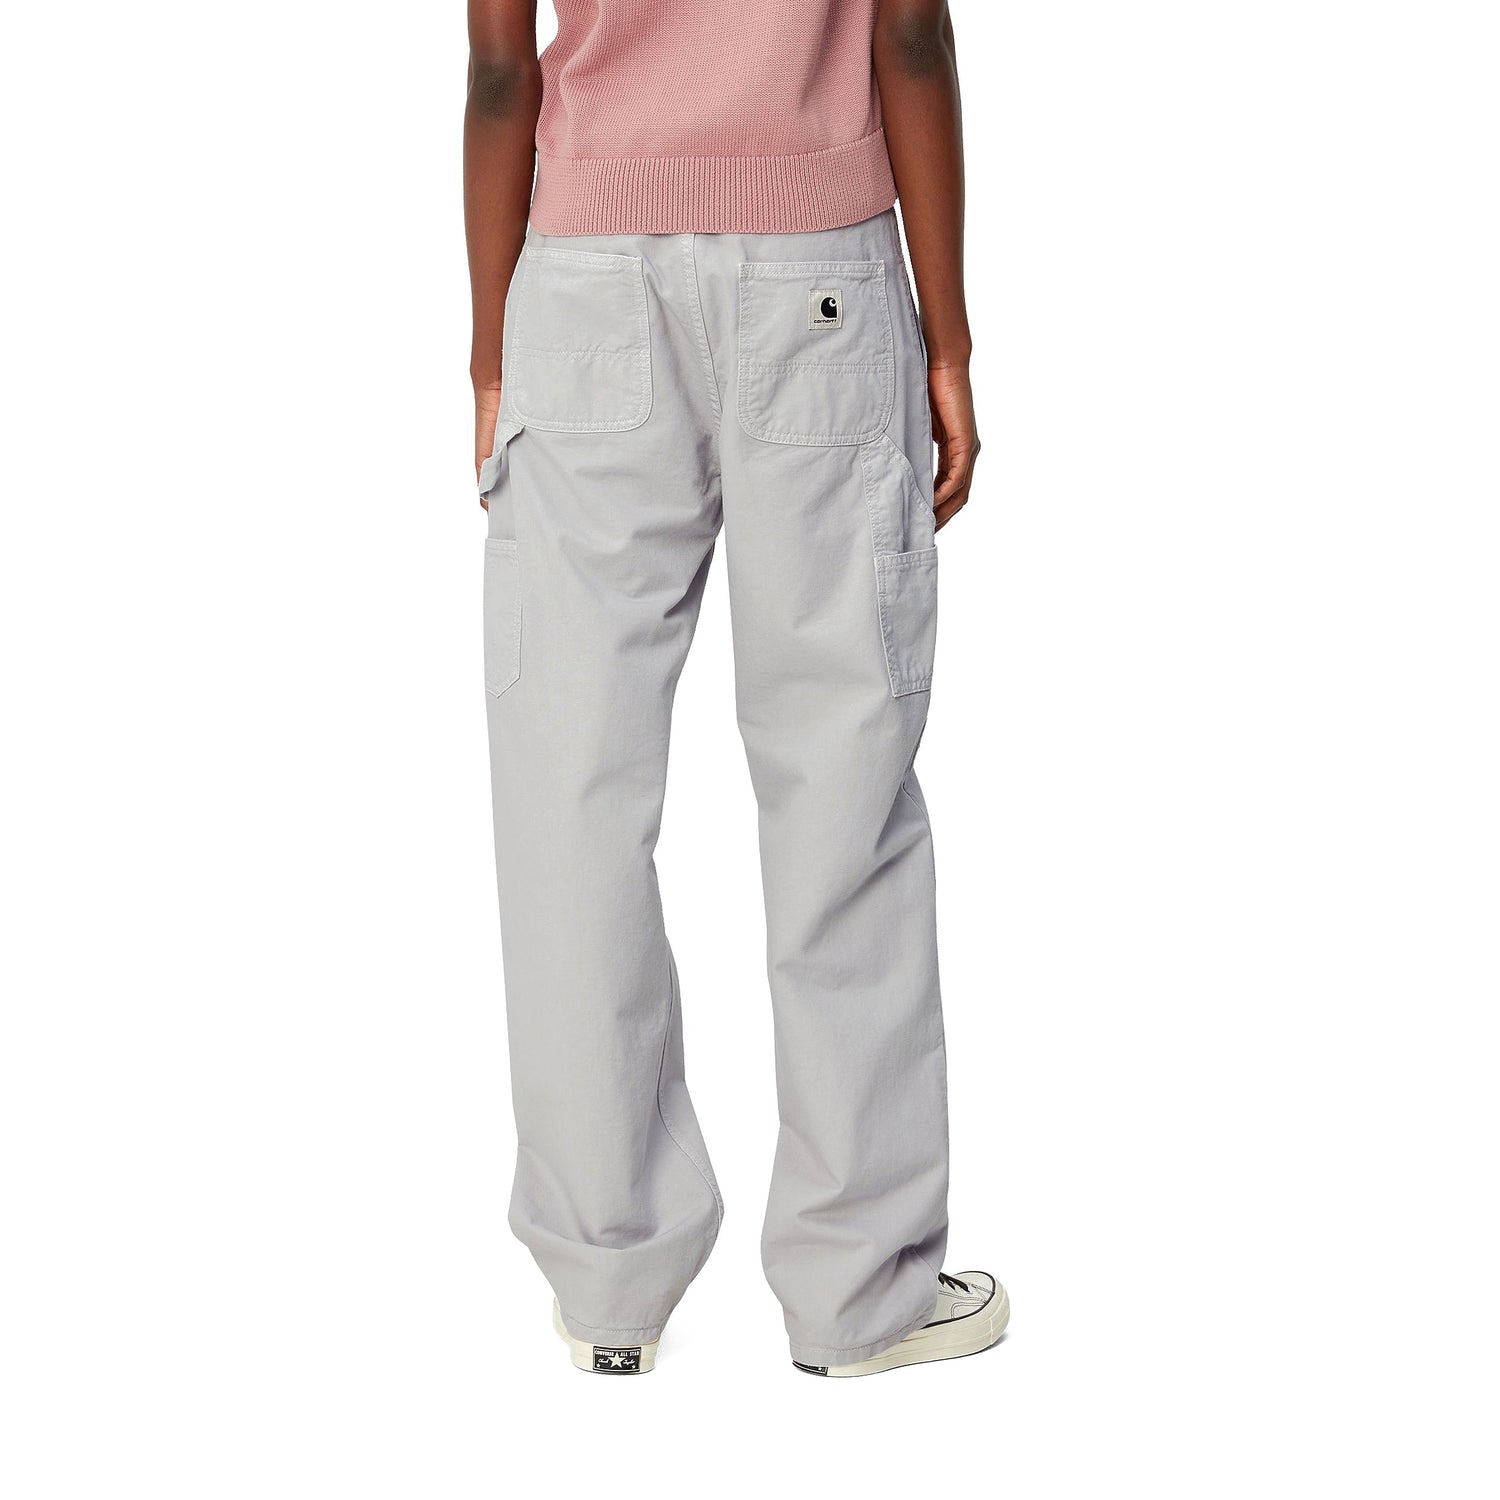 W' PIERCE PANT STRAIGHT SONIC SILVER GARMENT DYED